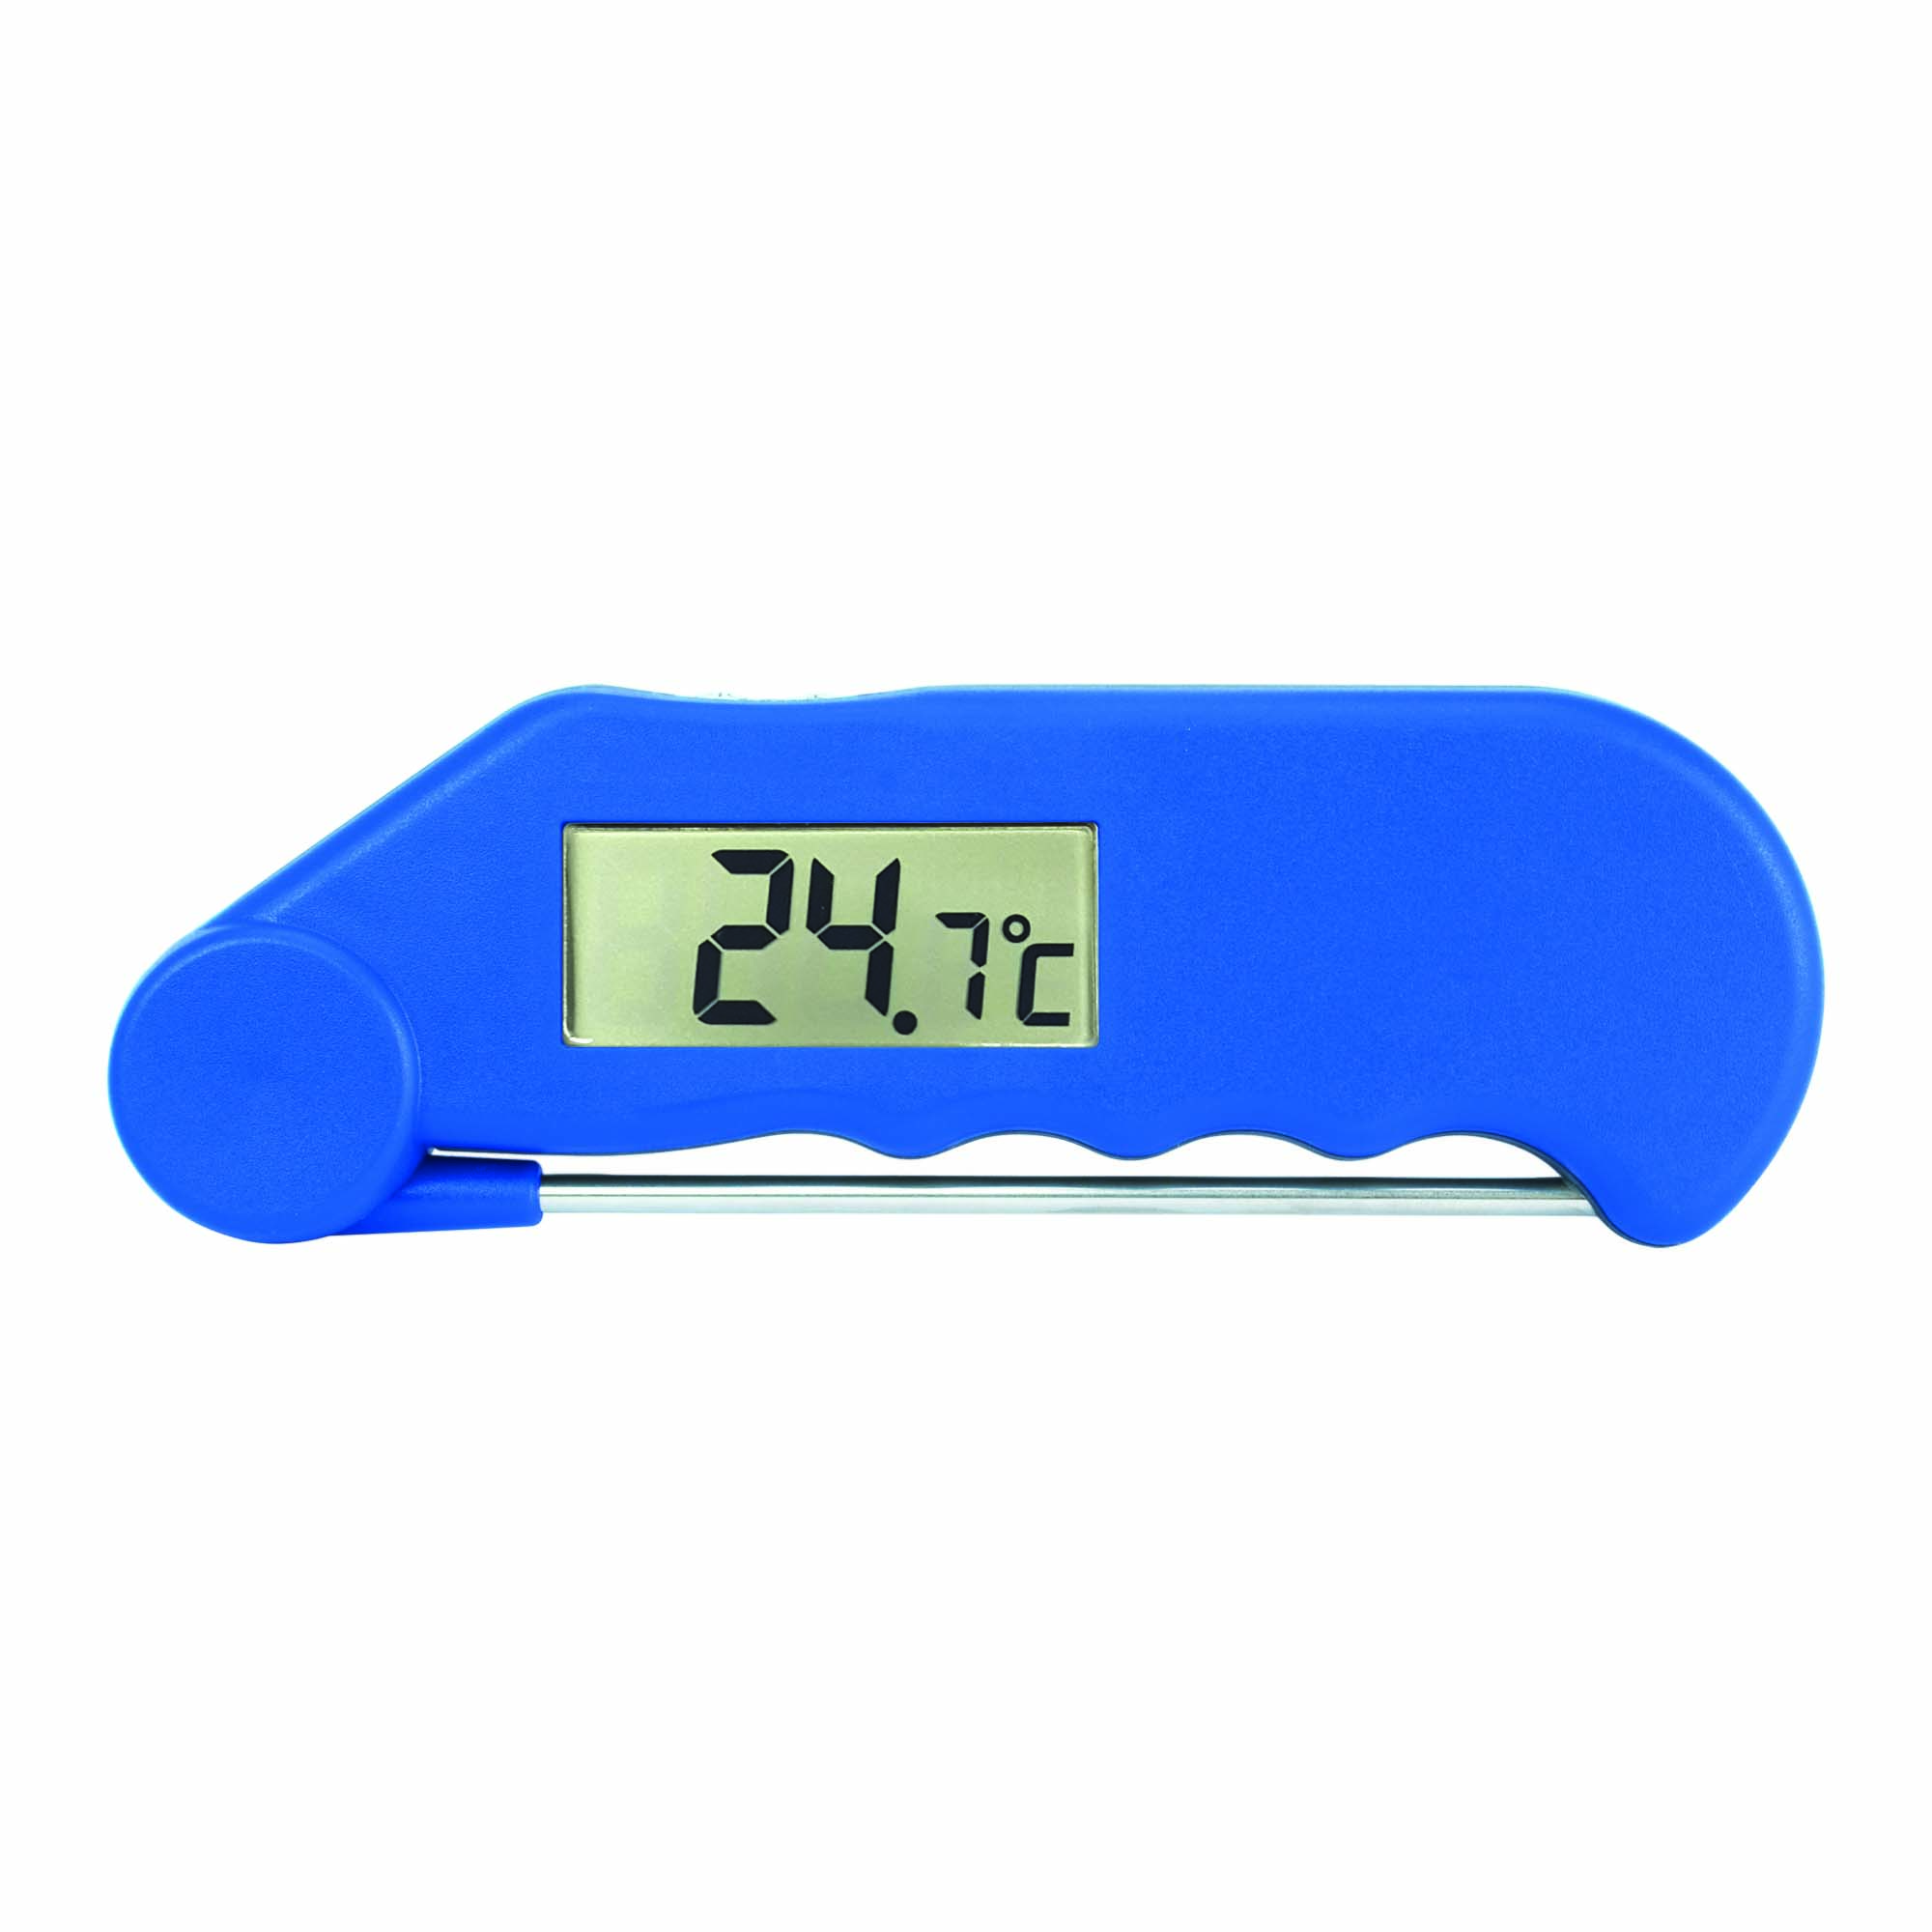 GOURMET FOLDING PROBE THERMOMETER BLUE